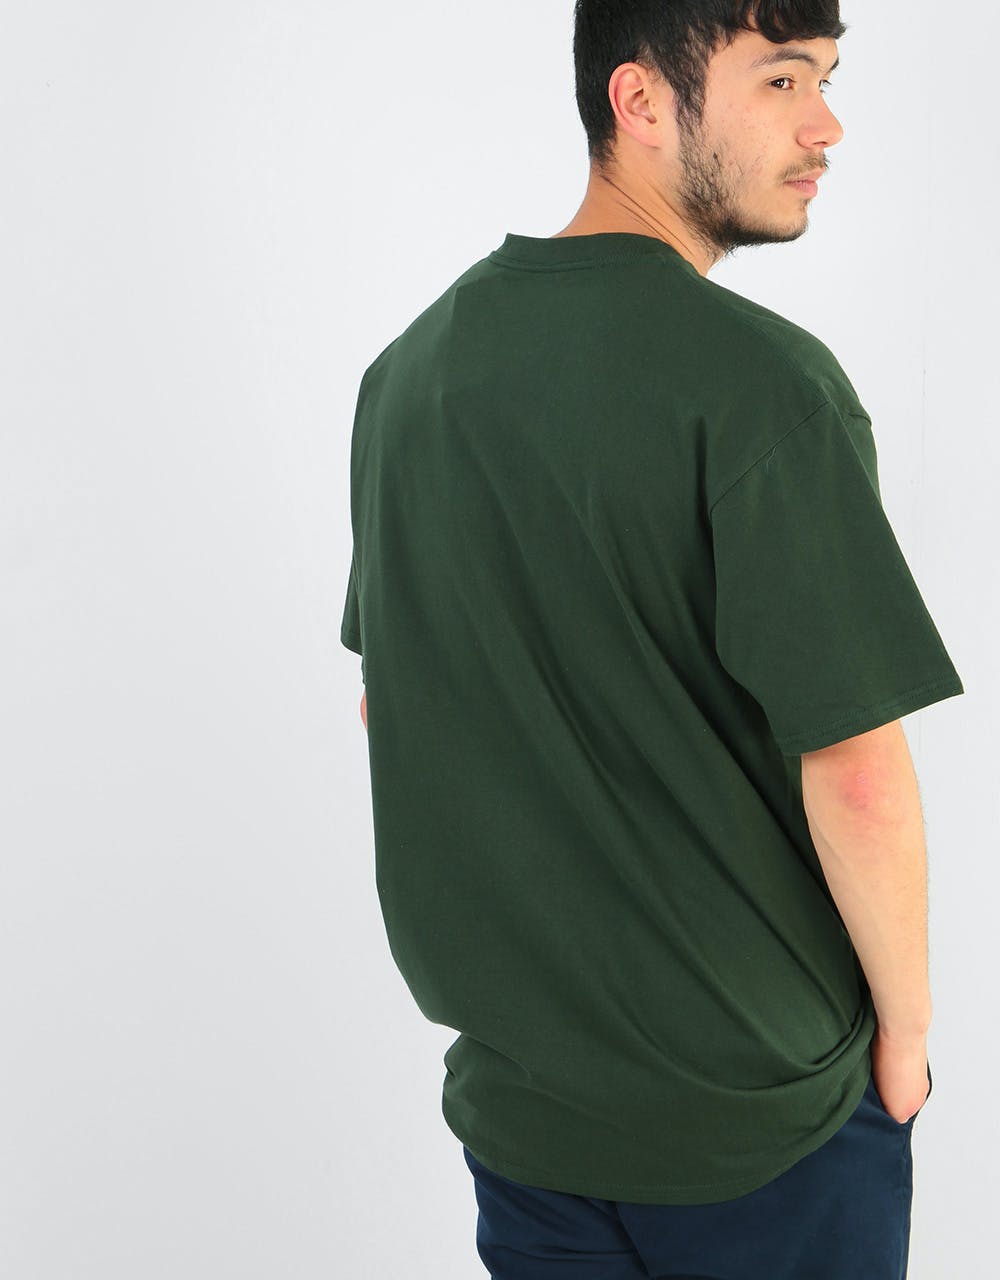 Zoo York Ninety 3T-Shirt - Forest Green